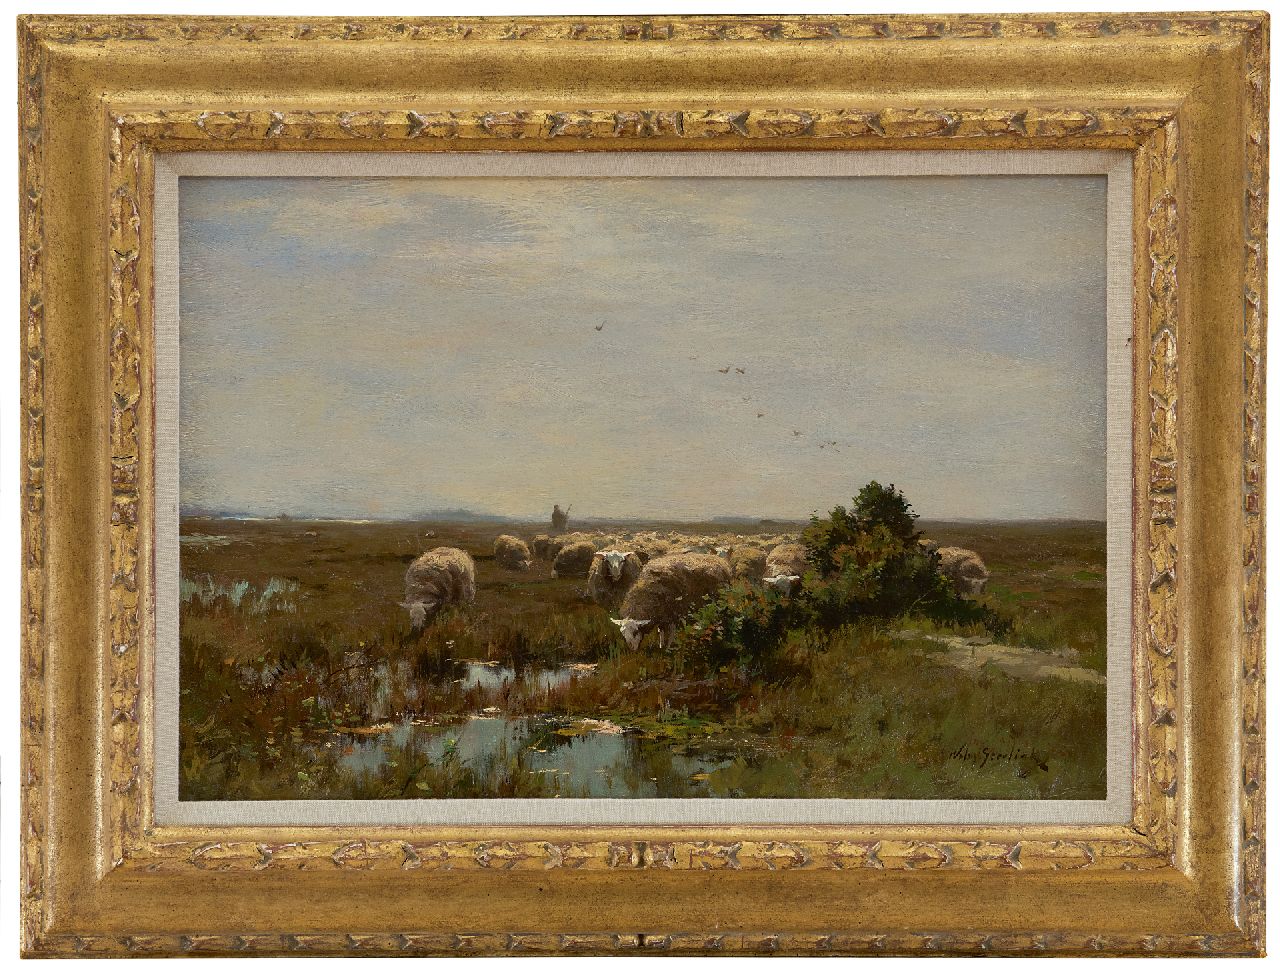 Steelink jr. W.  | Willem Steelink jr. | Paintings offered for sale | Grazing sheep on the heathland, oil on canvas 33.1 x 48.0 cm, signed l.r.